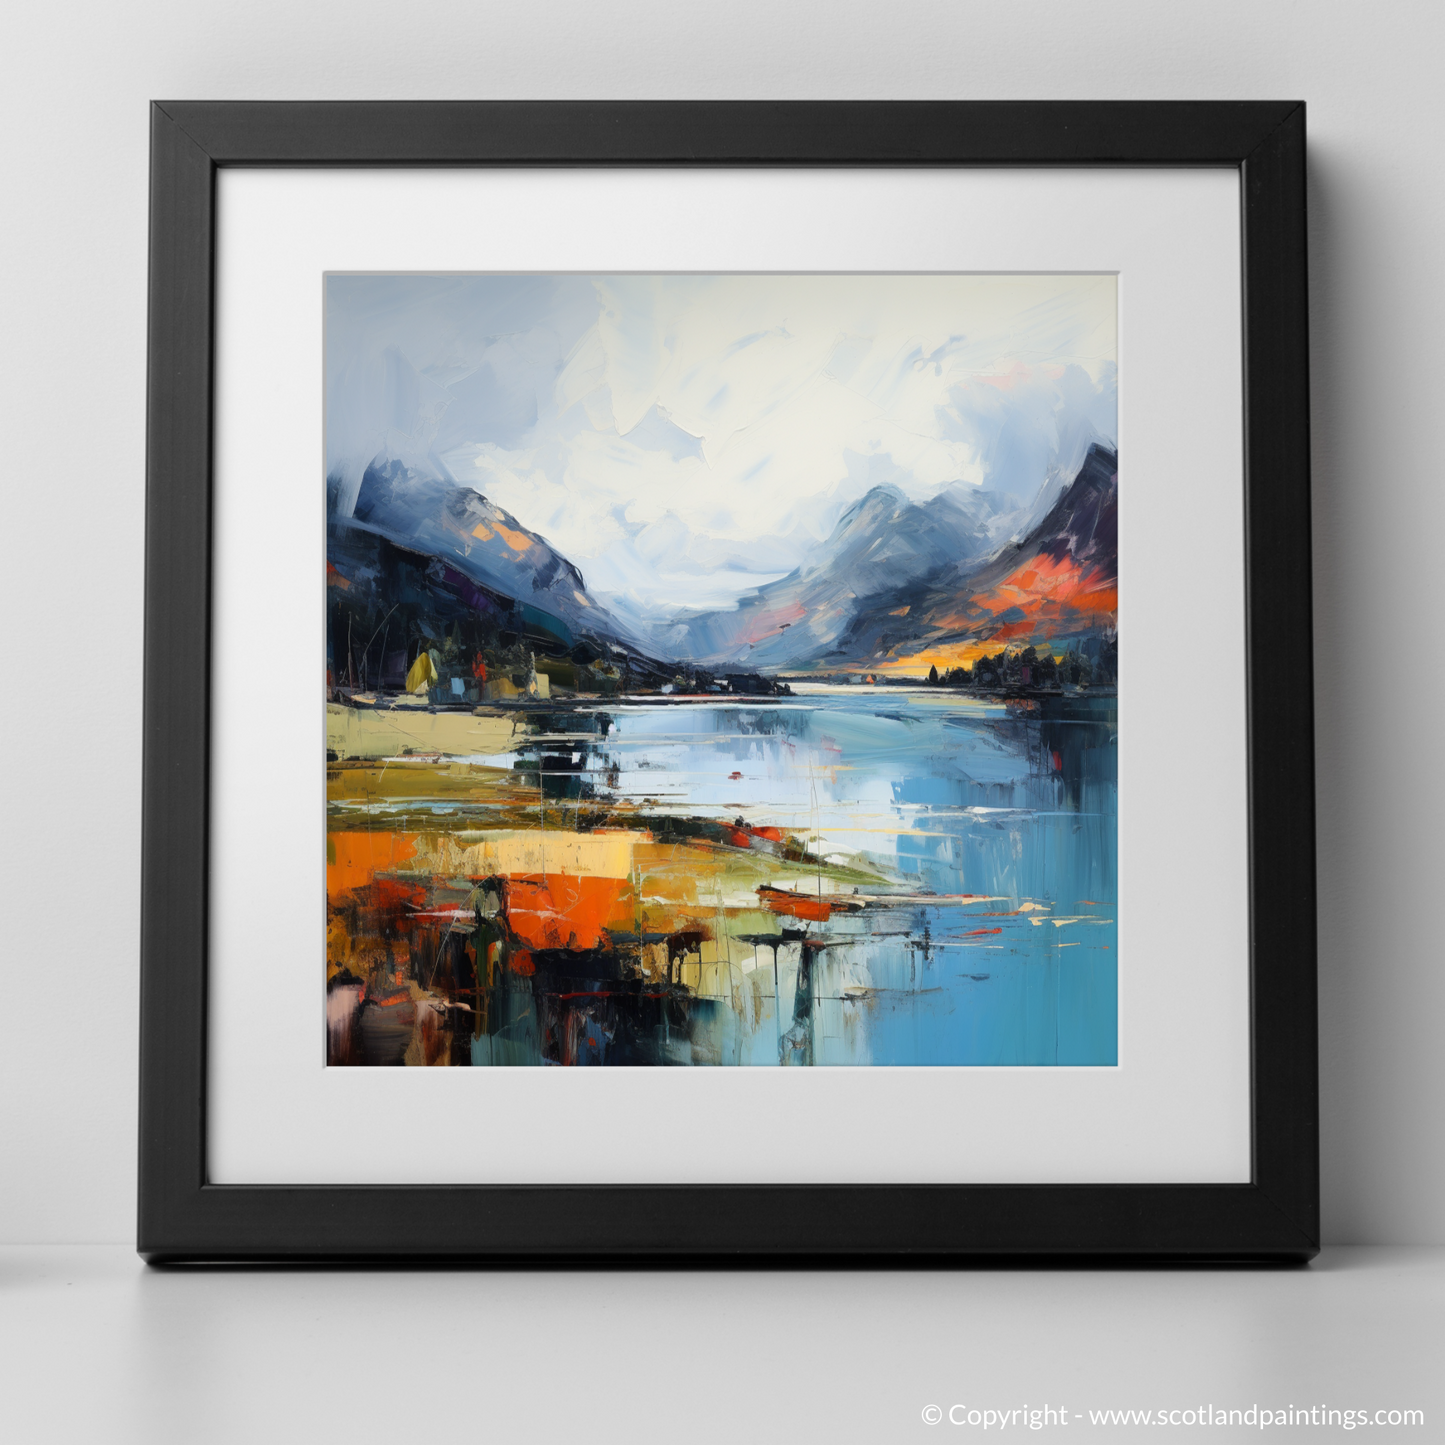 Art Print of Loch Leven, Highlands with a black frame